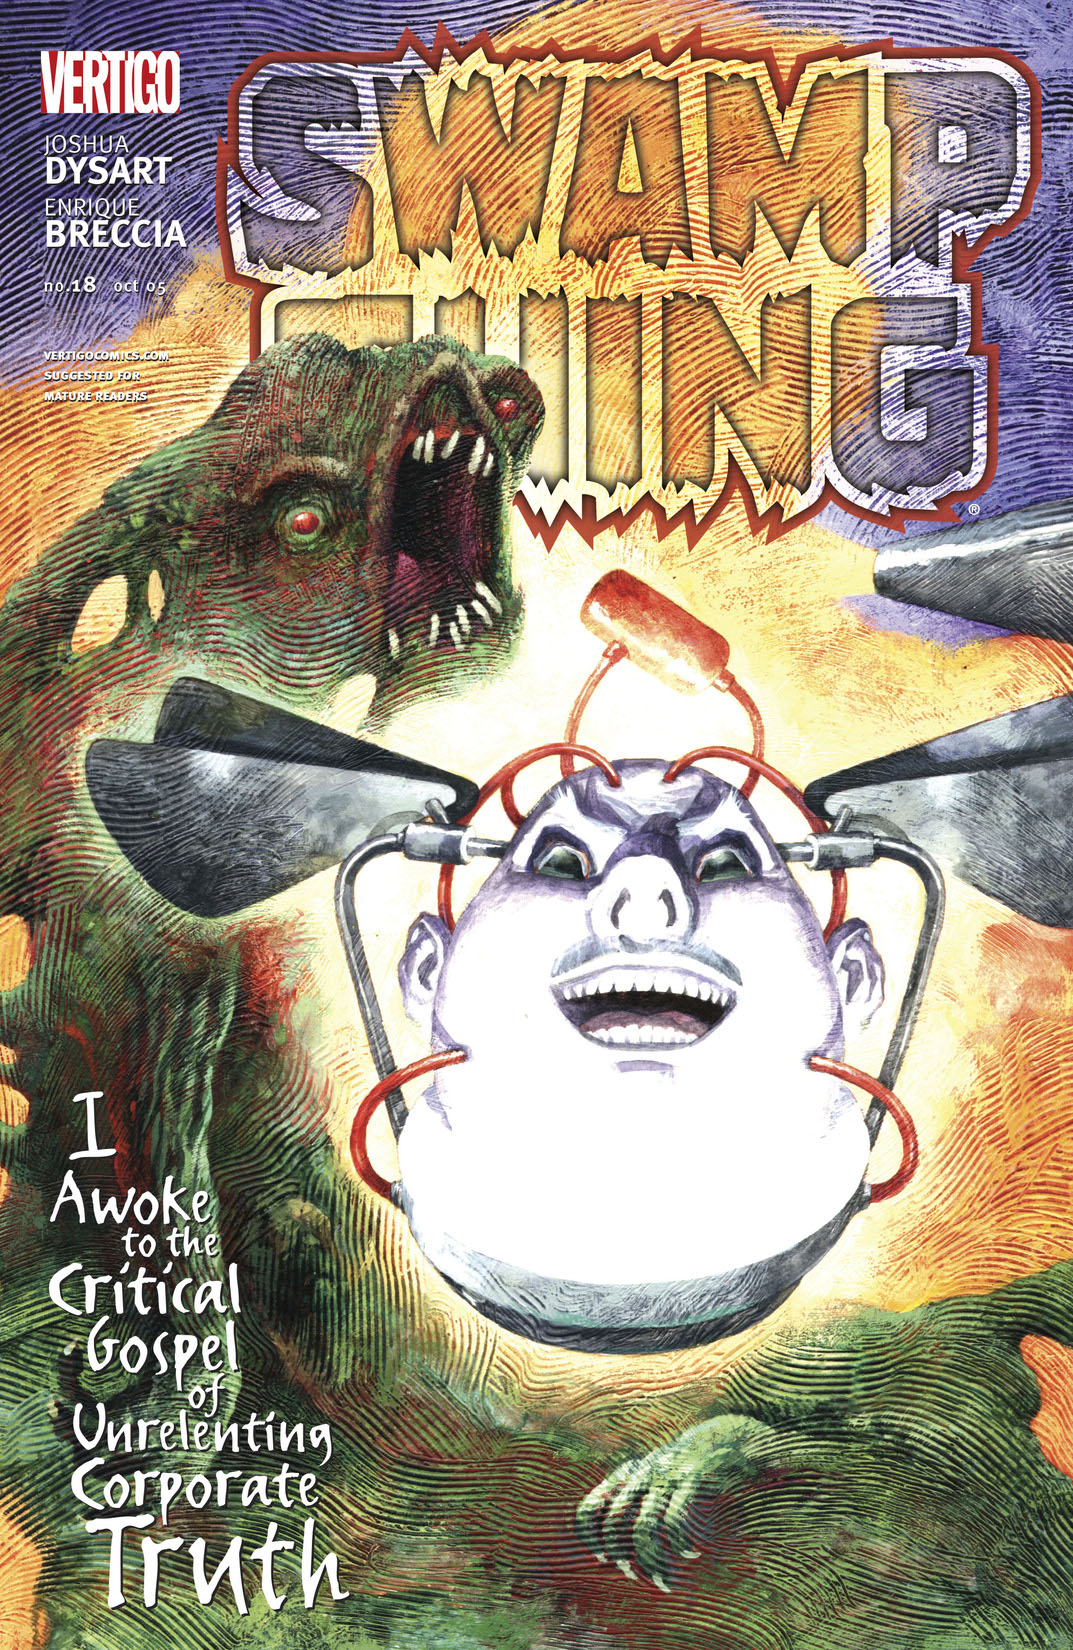 Swamp Thing (2004-) #18 preview images